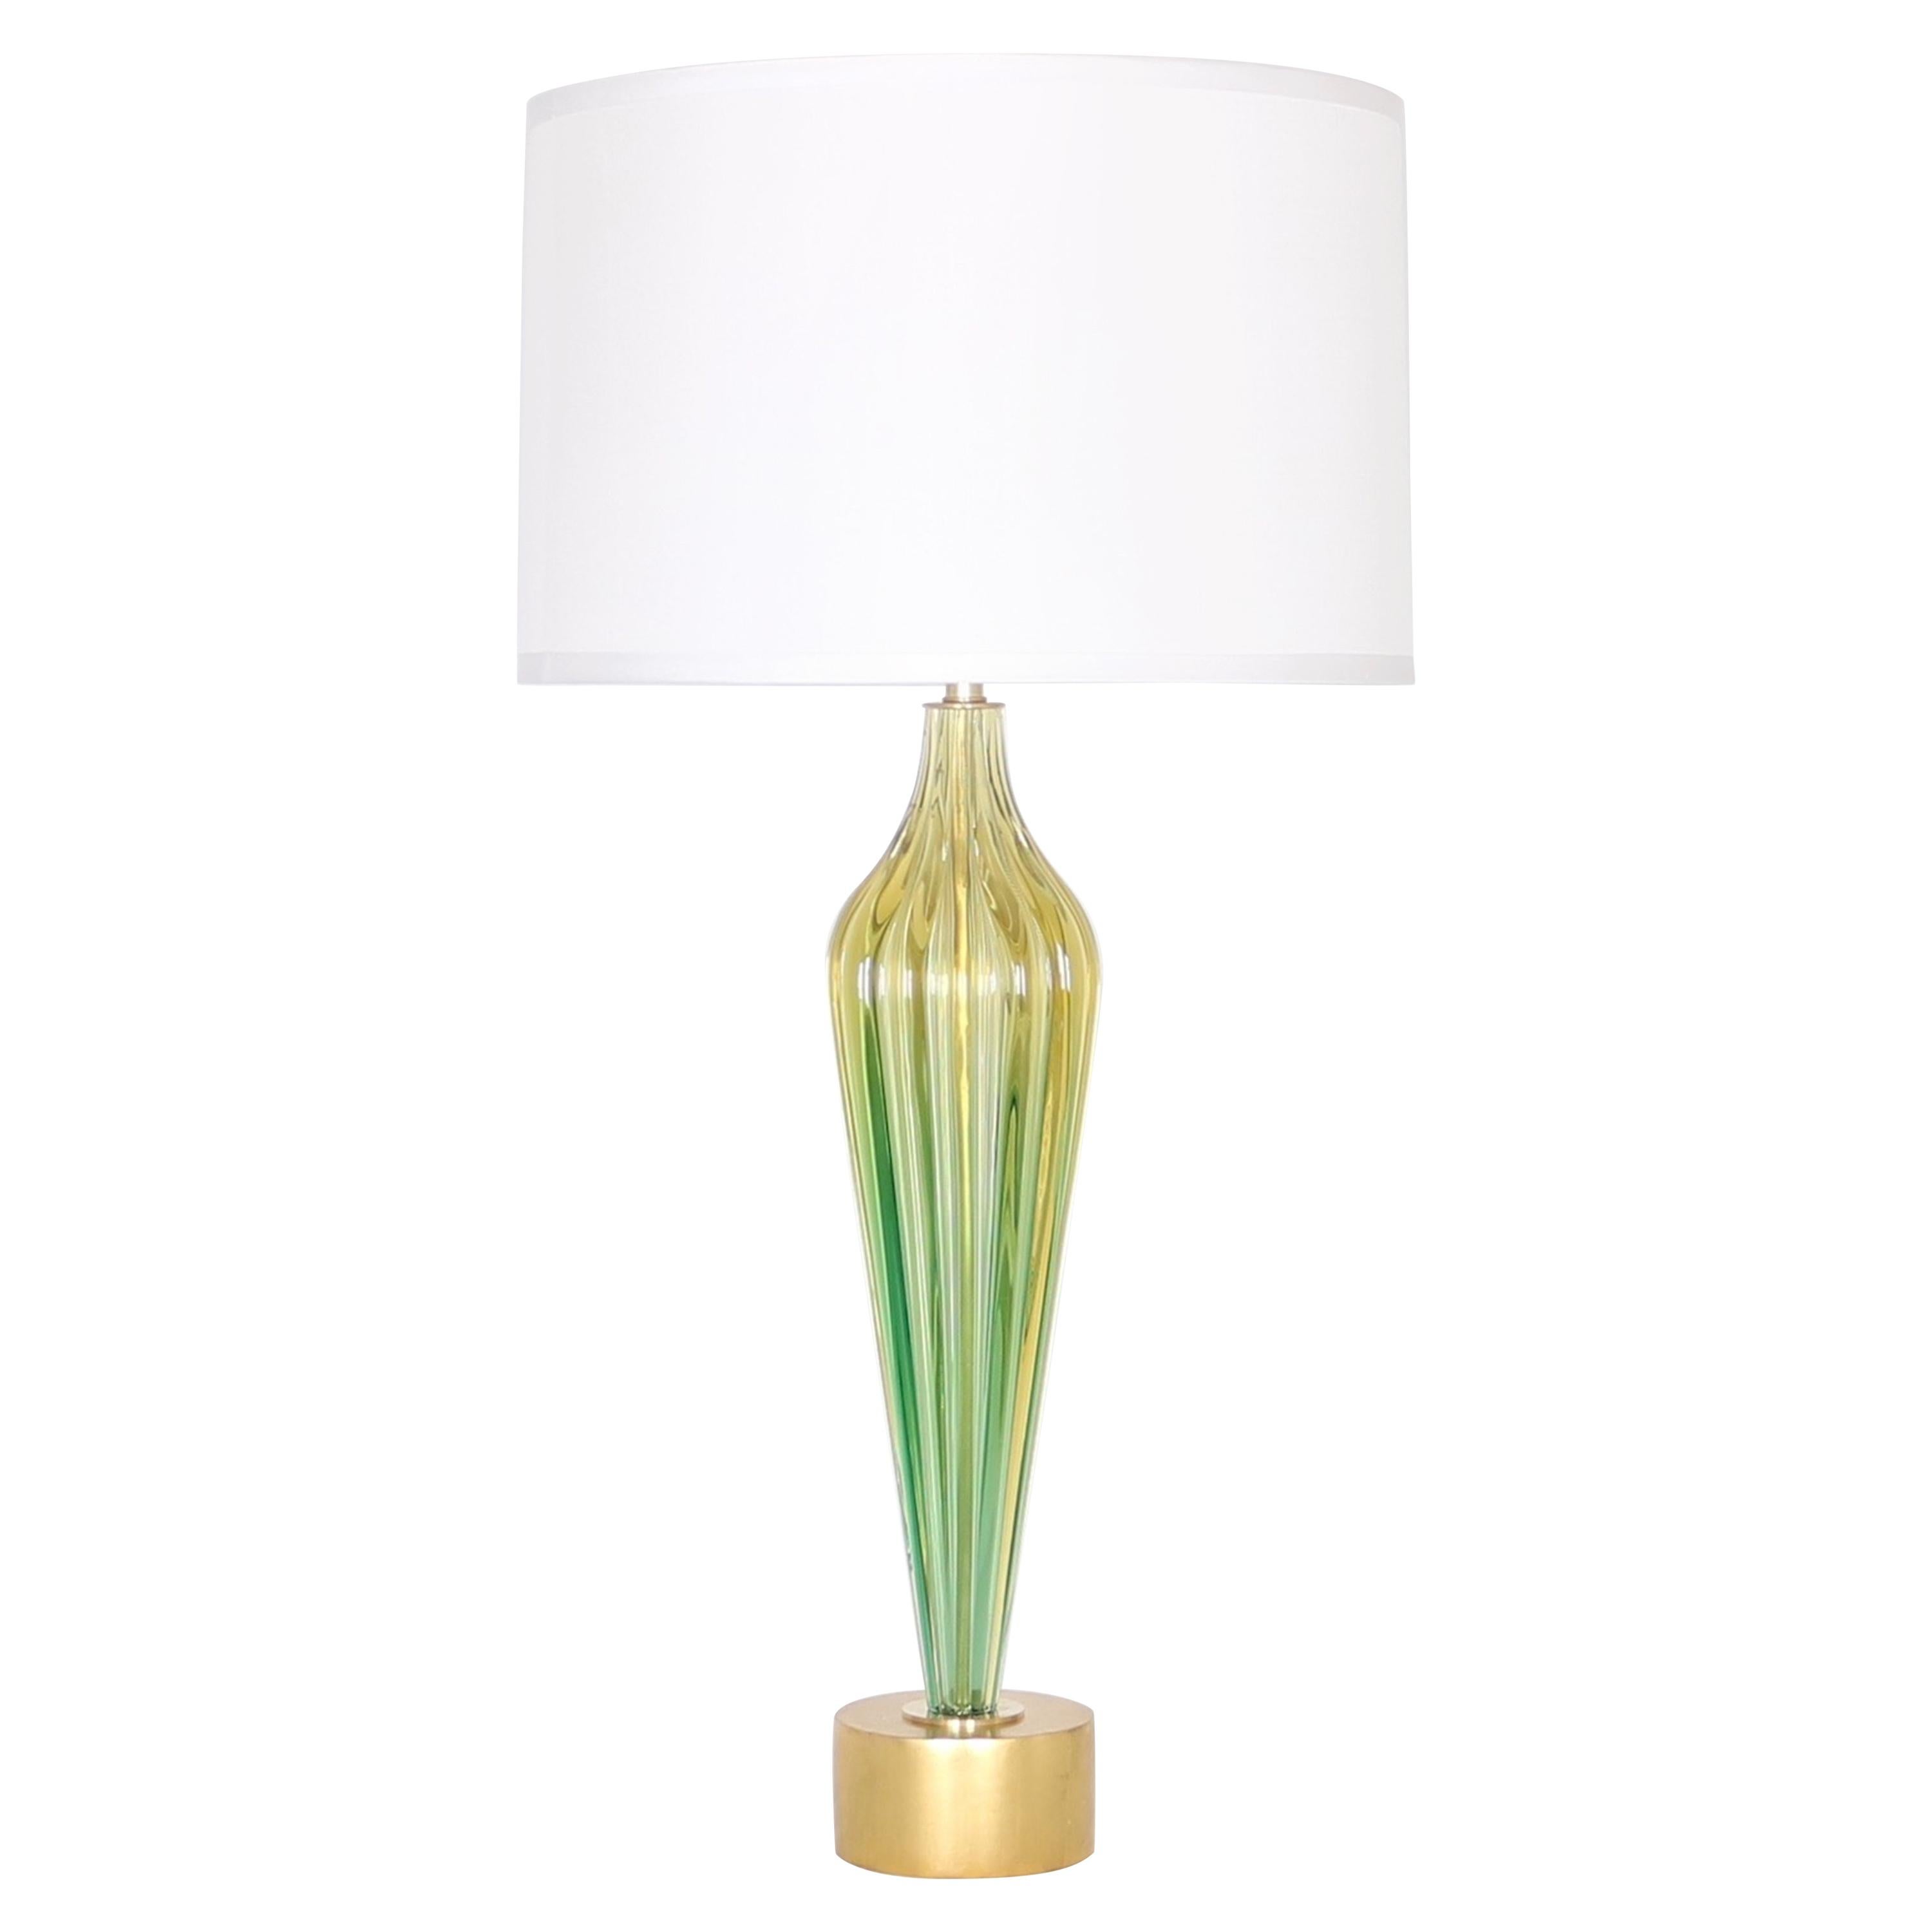 Hollywood Regency Seguso Lamp in Green and Gold Murano Glass